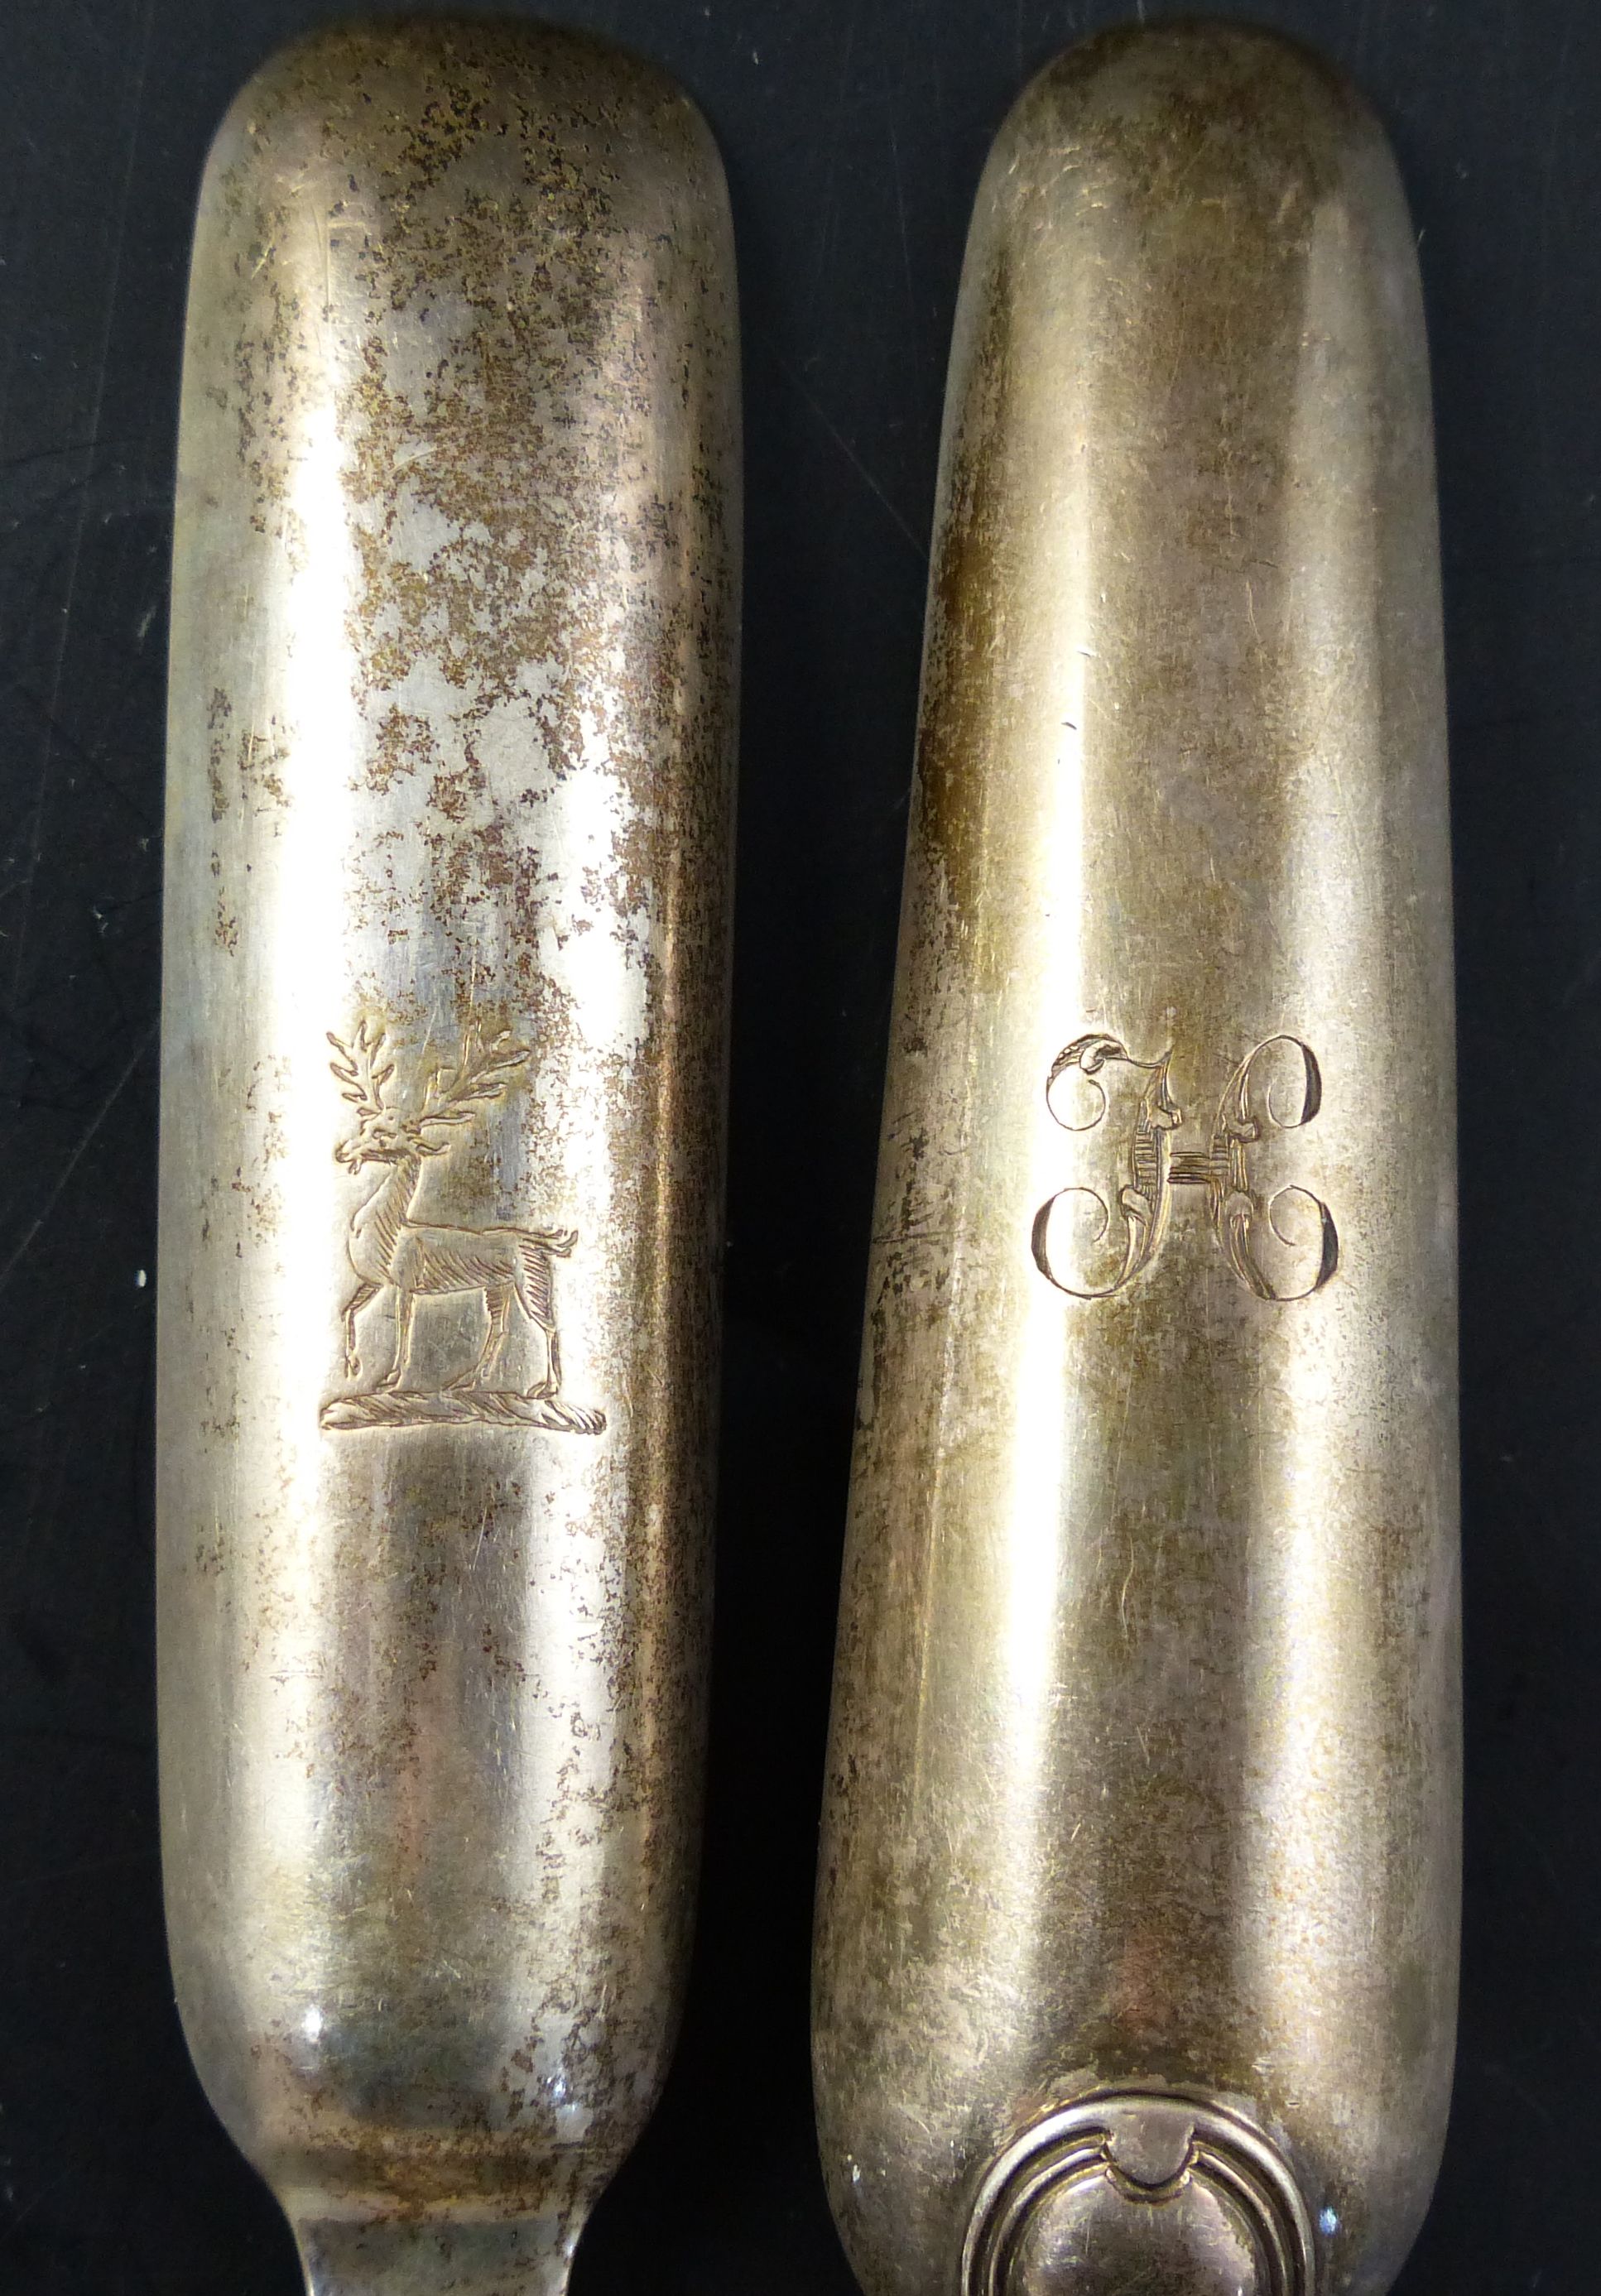 Two 19th century silver marrow scoops, thread pattern by Eley, Fearn & Chawner, London, 1808 and - Image 3 of 7